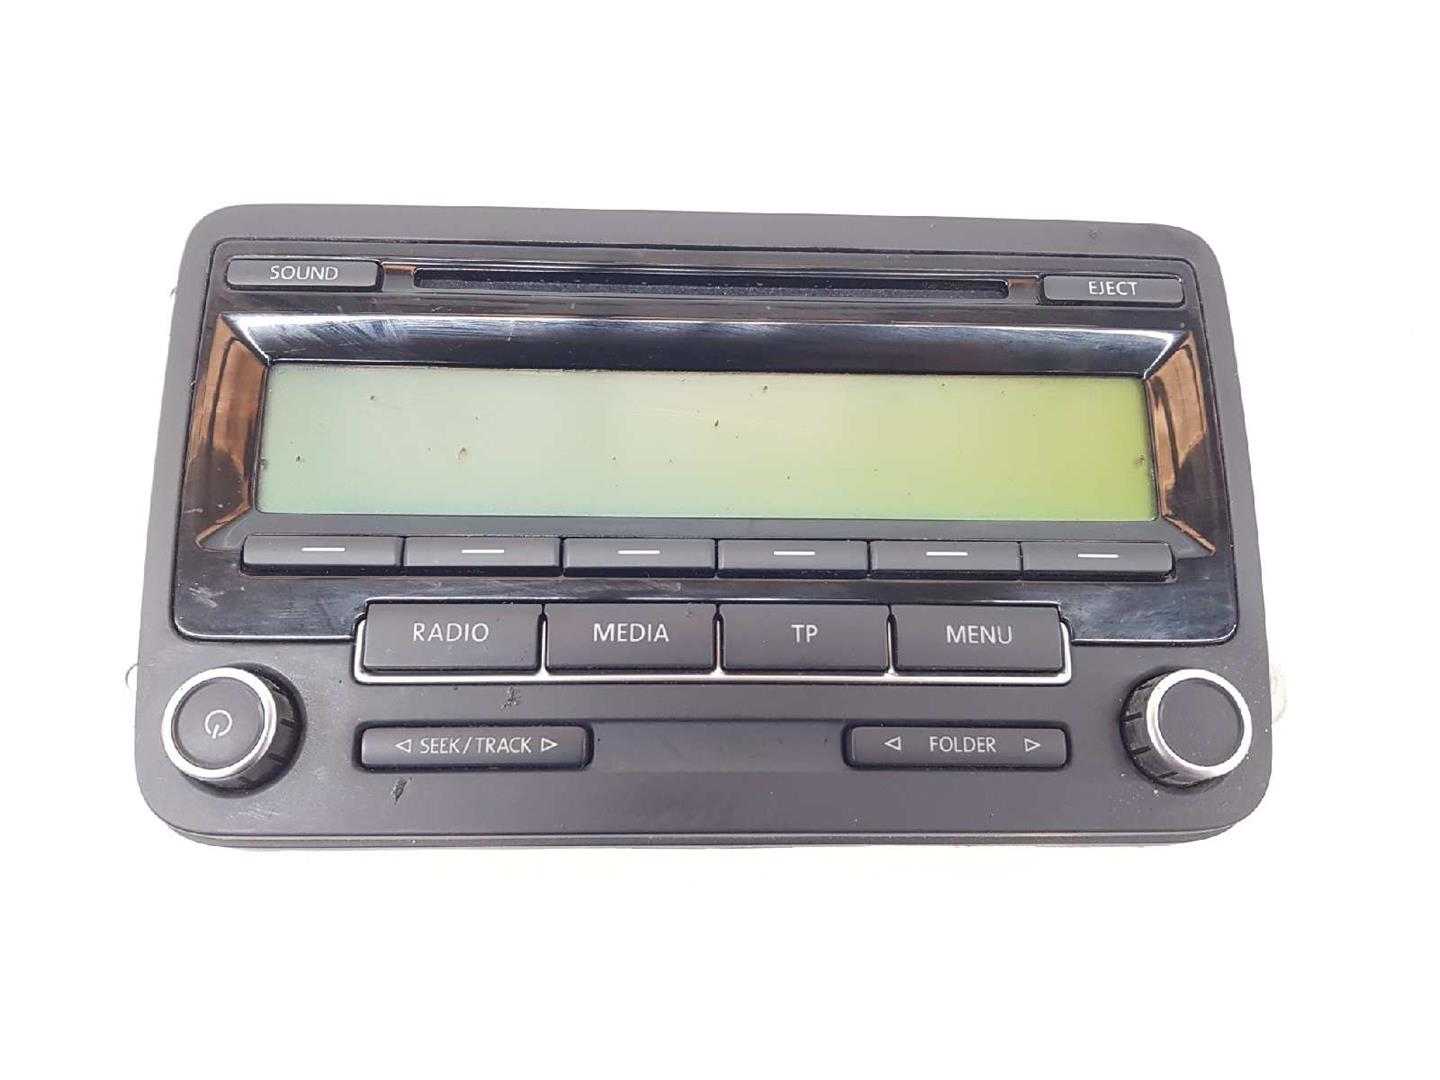 SEAT Leon 2 generation (2005-2012) Music Player Without GPS 5P0035186, 7640236366, RCD310 23777308